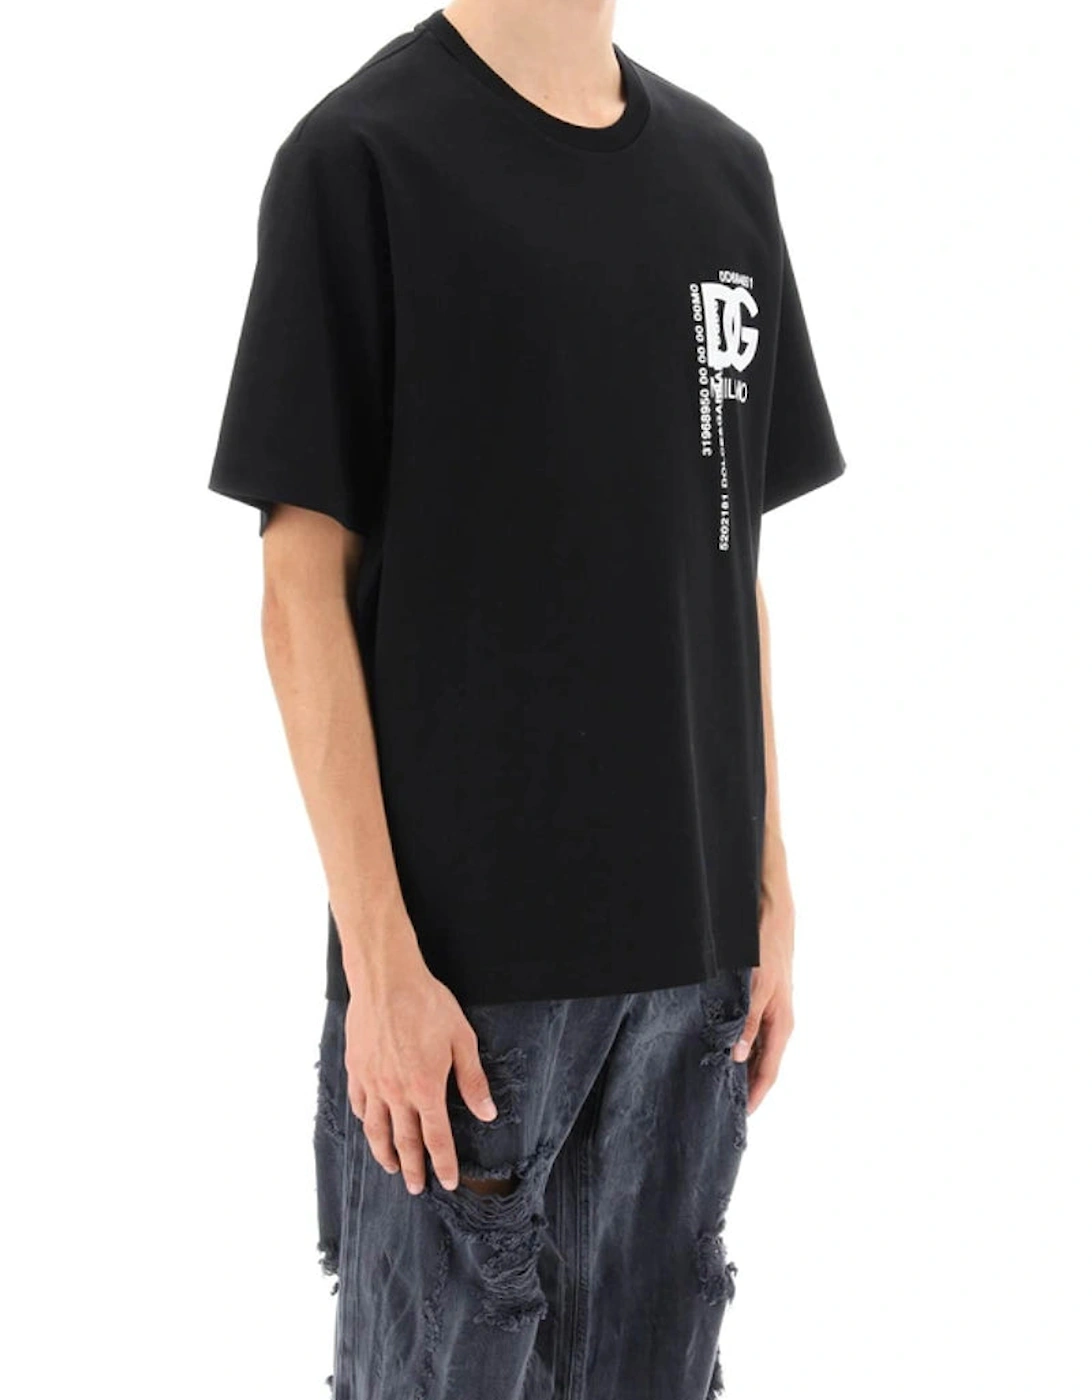 DG Logo Embroidery and Prints T-Shirt in Black